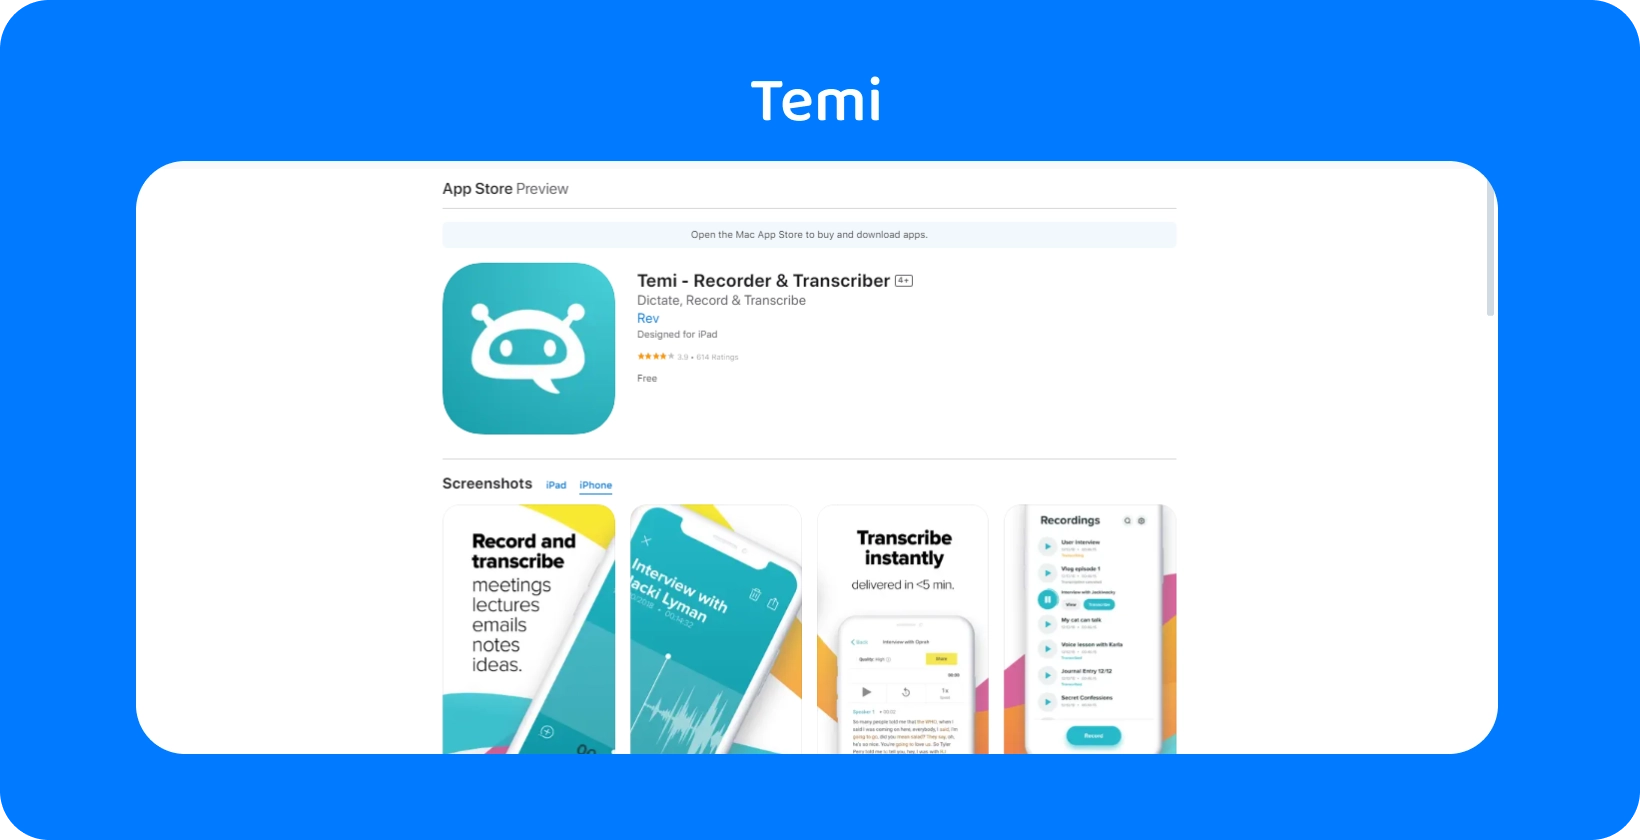 Screenshot of Temi App Store listing, emphasizing its quick recording and instant transcription features.